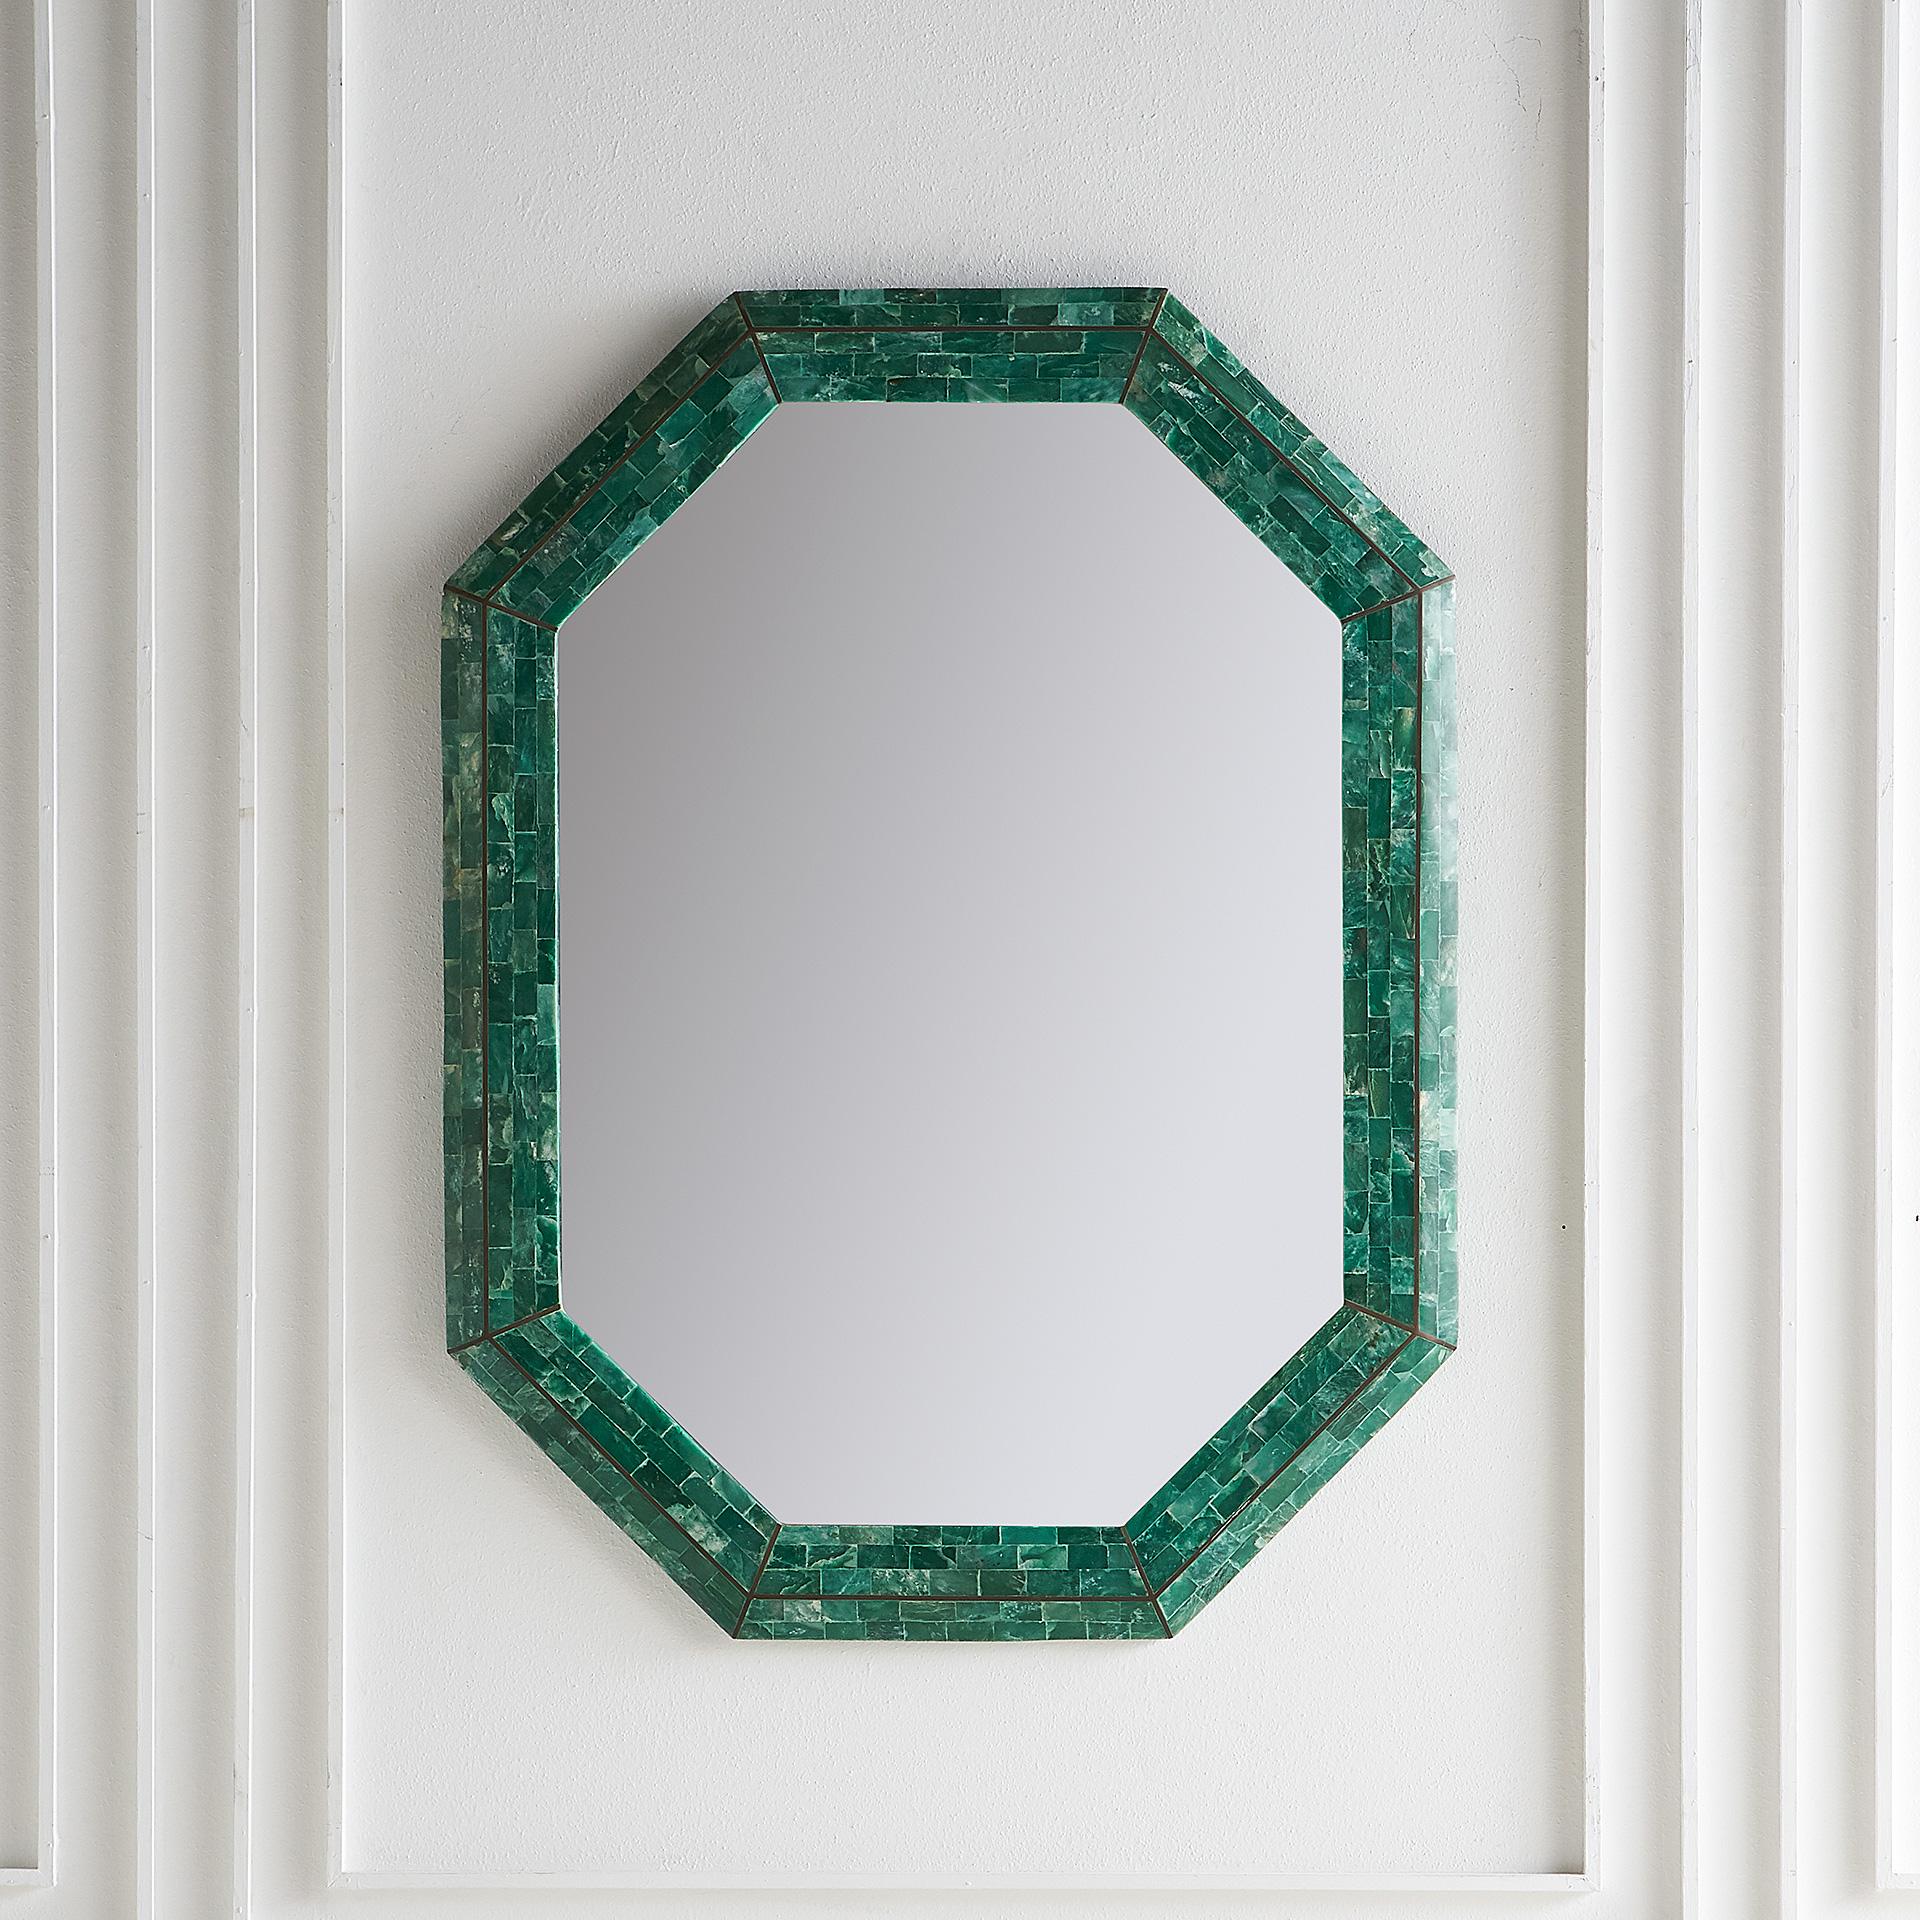 A stunning mirror attributed to Maitland Smith with a beautiful tessellated marble frame in a striking shade of emerald green.

Dimensions: 30” W x 40” H

Condition: Excellent.